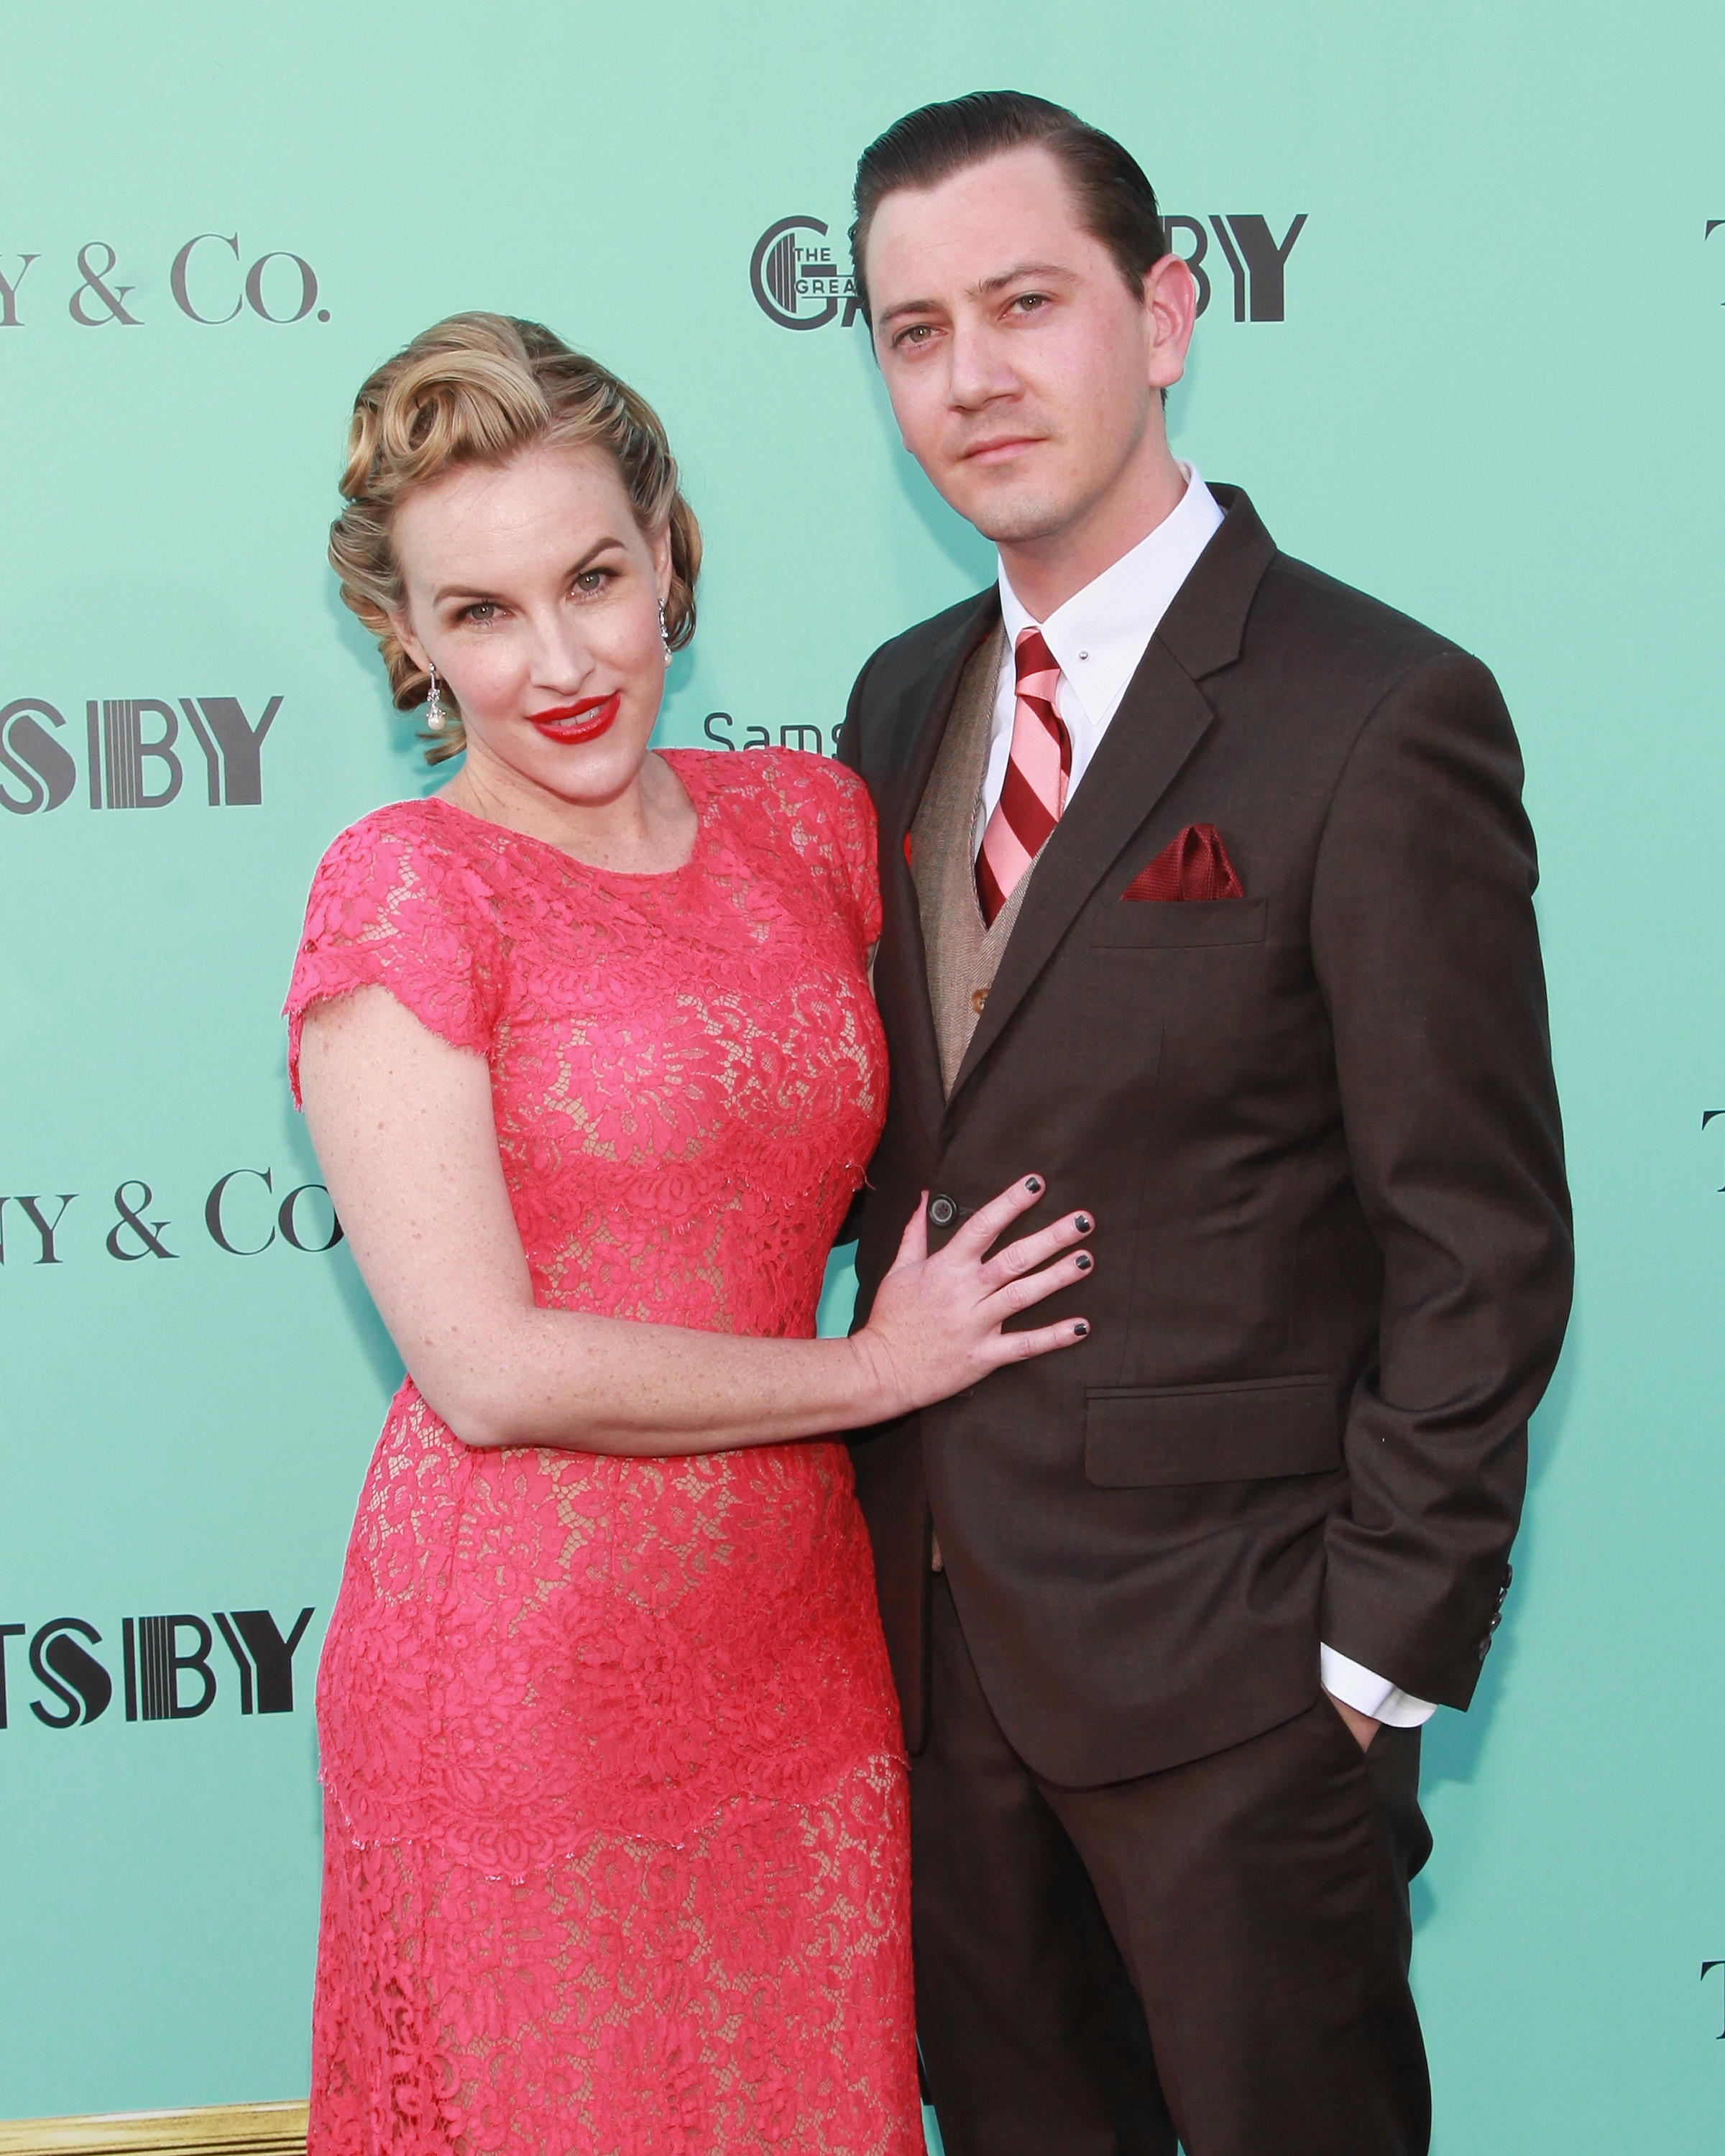 Kate Mulvany & Hamish Michael attend the World Premiere of The Great Gatsby at Avery Fisher Hall, Lincoln Center for the Performing Arts on May 1, 2013 in New York City.